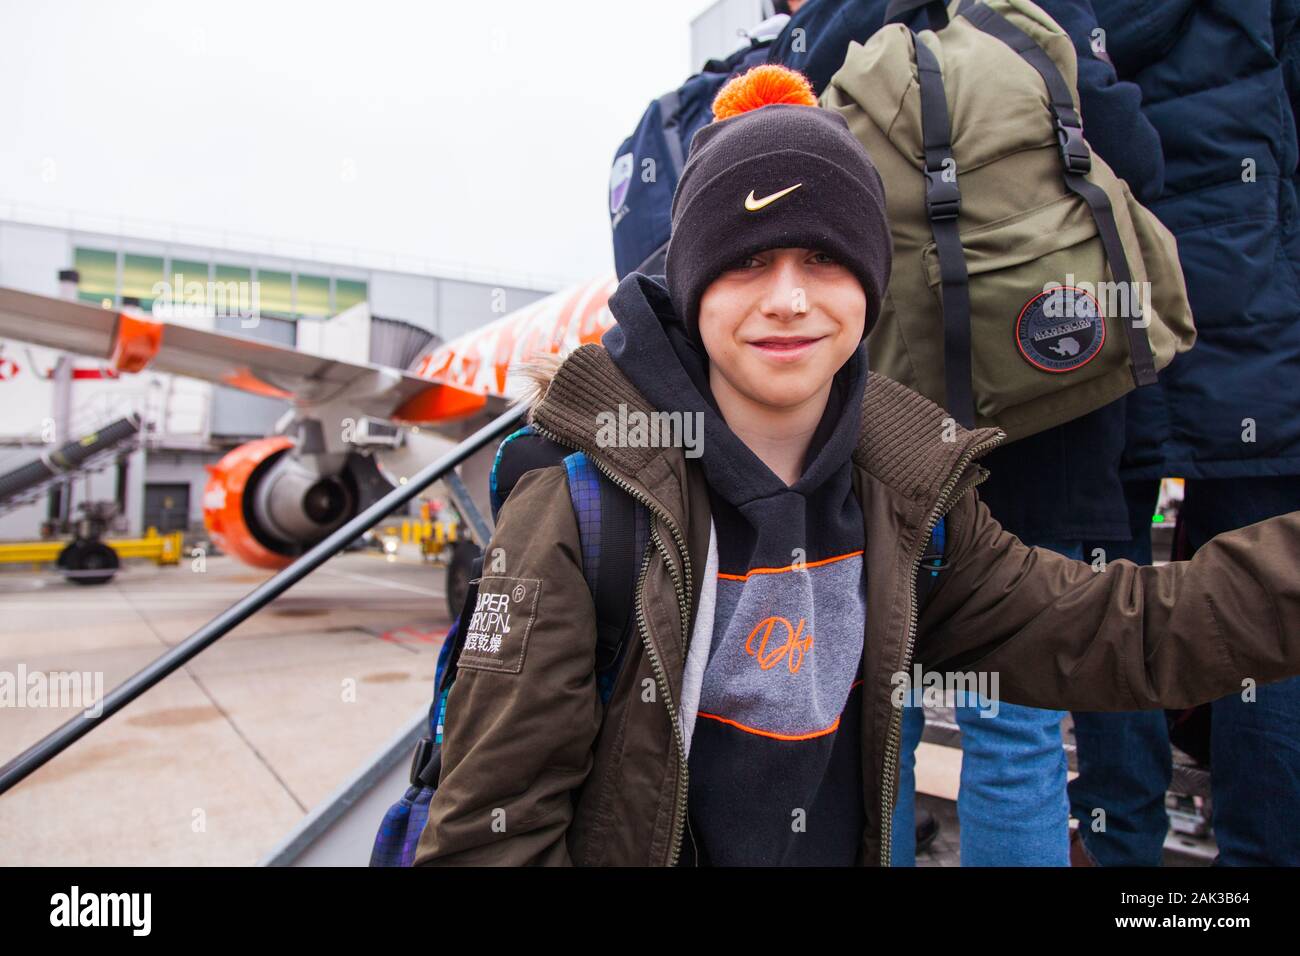 10 year old boy excitedly boarding a Easyjet flight at London Gatwick airport between London Gatwick LGW and Vienna Austria VIE Stock Photo